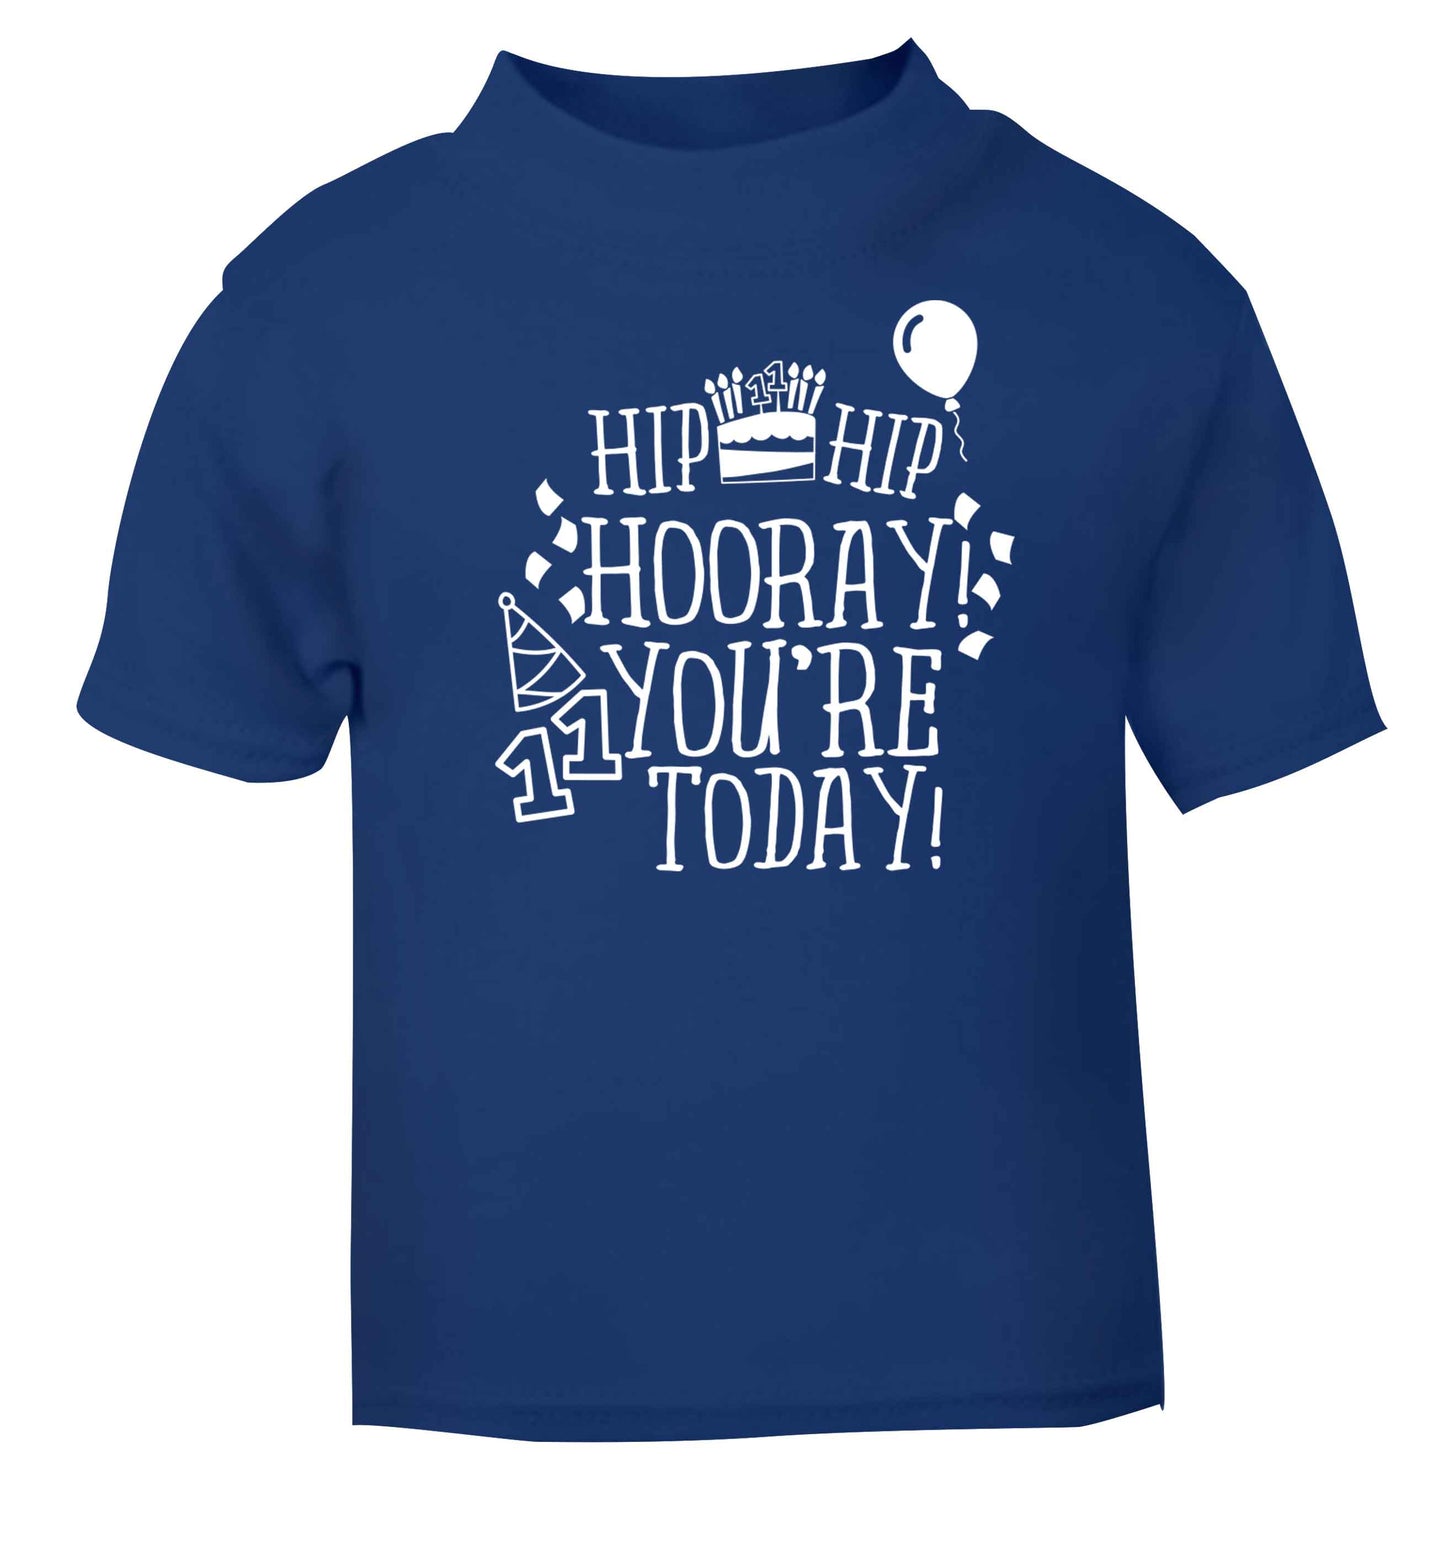 Hip hip hooray I you're eleven today! blue baby toddler Tshirt 2 Years